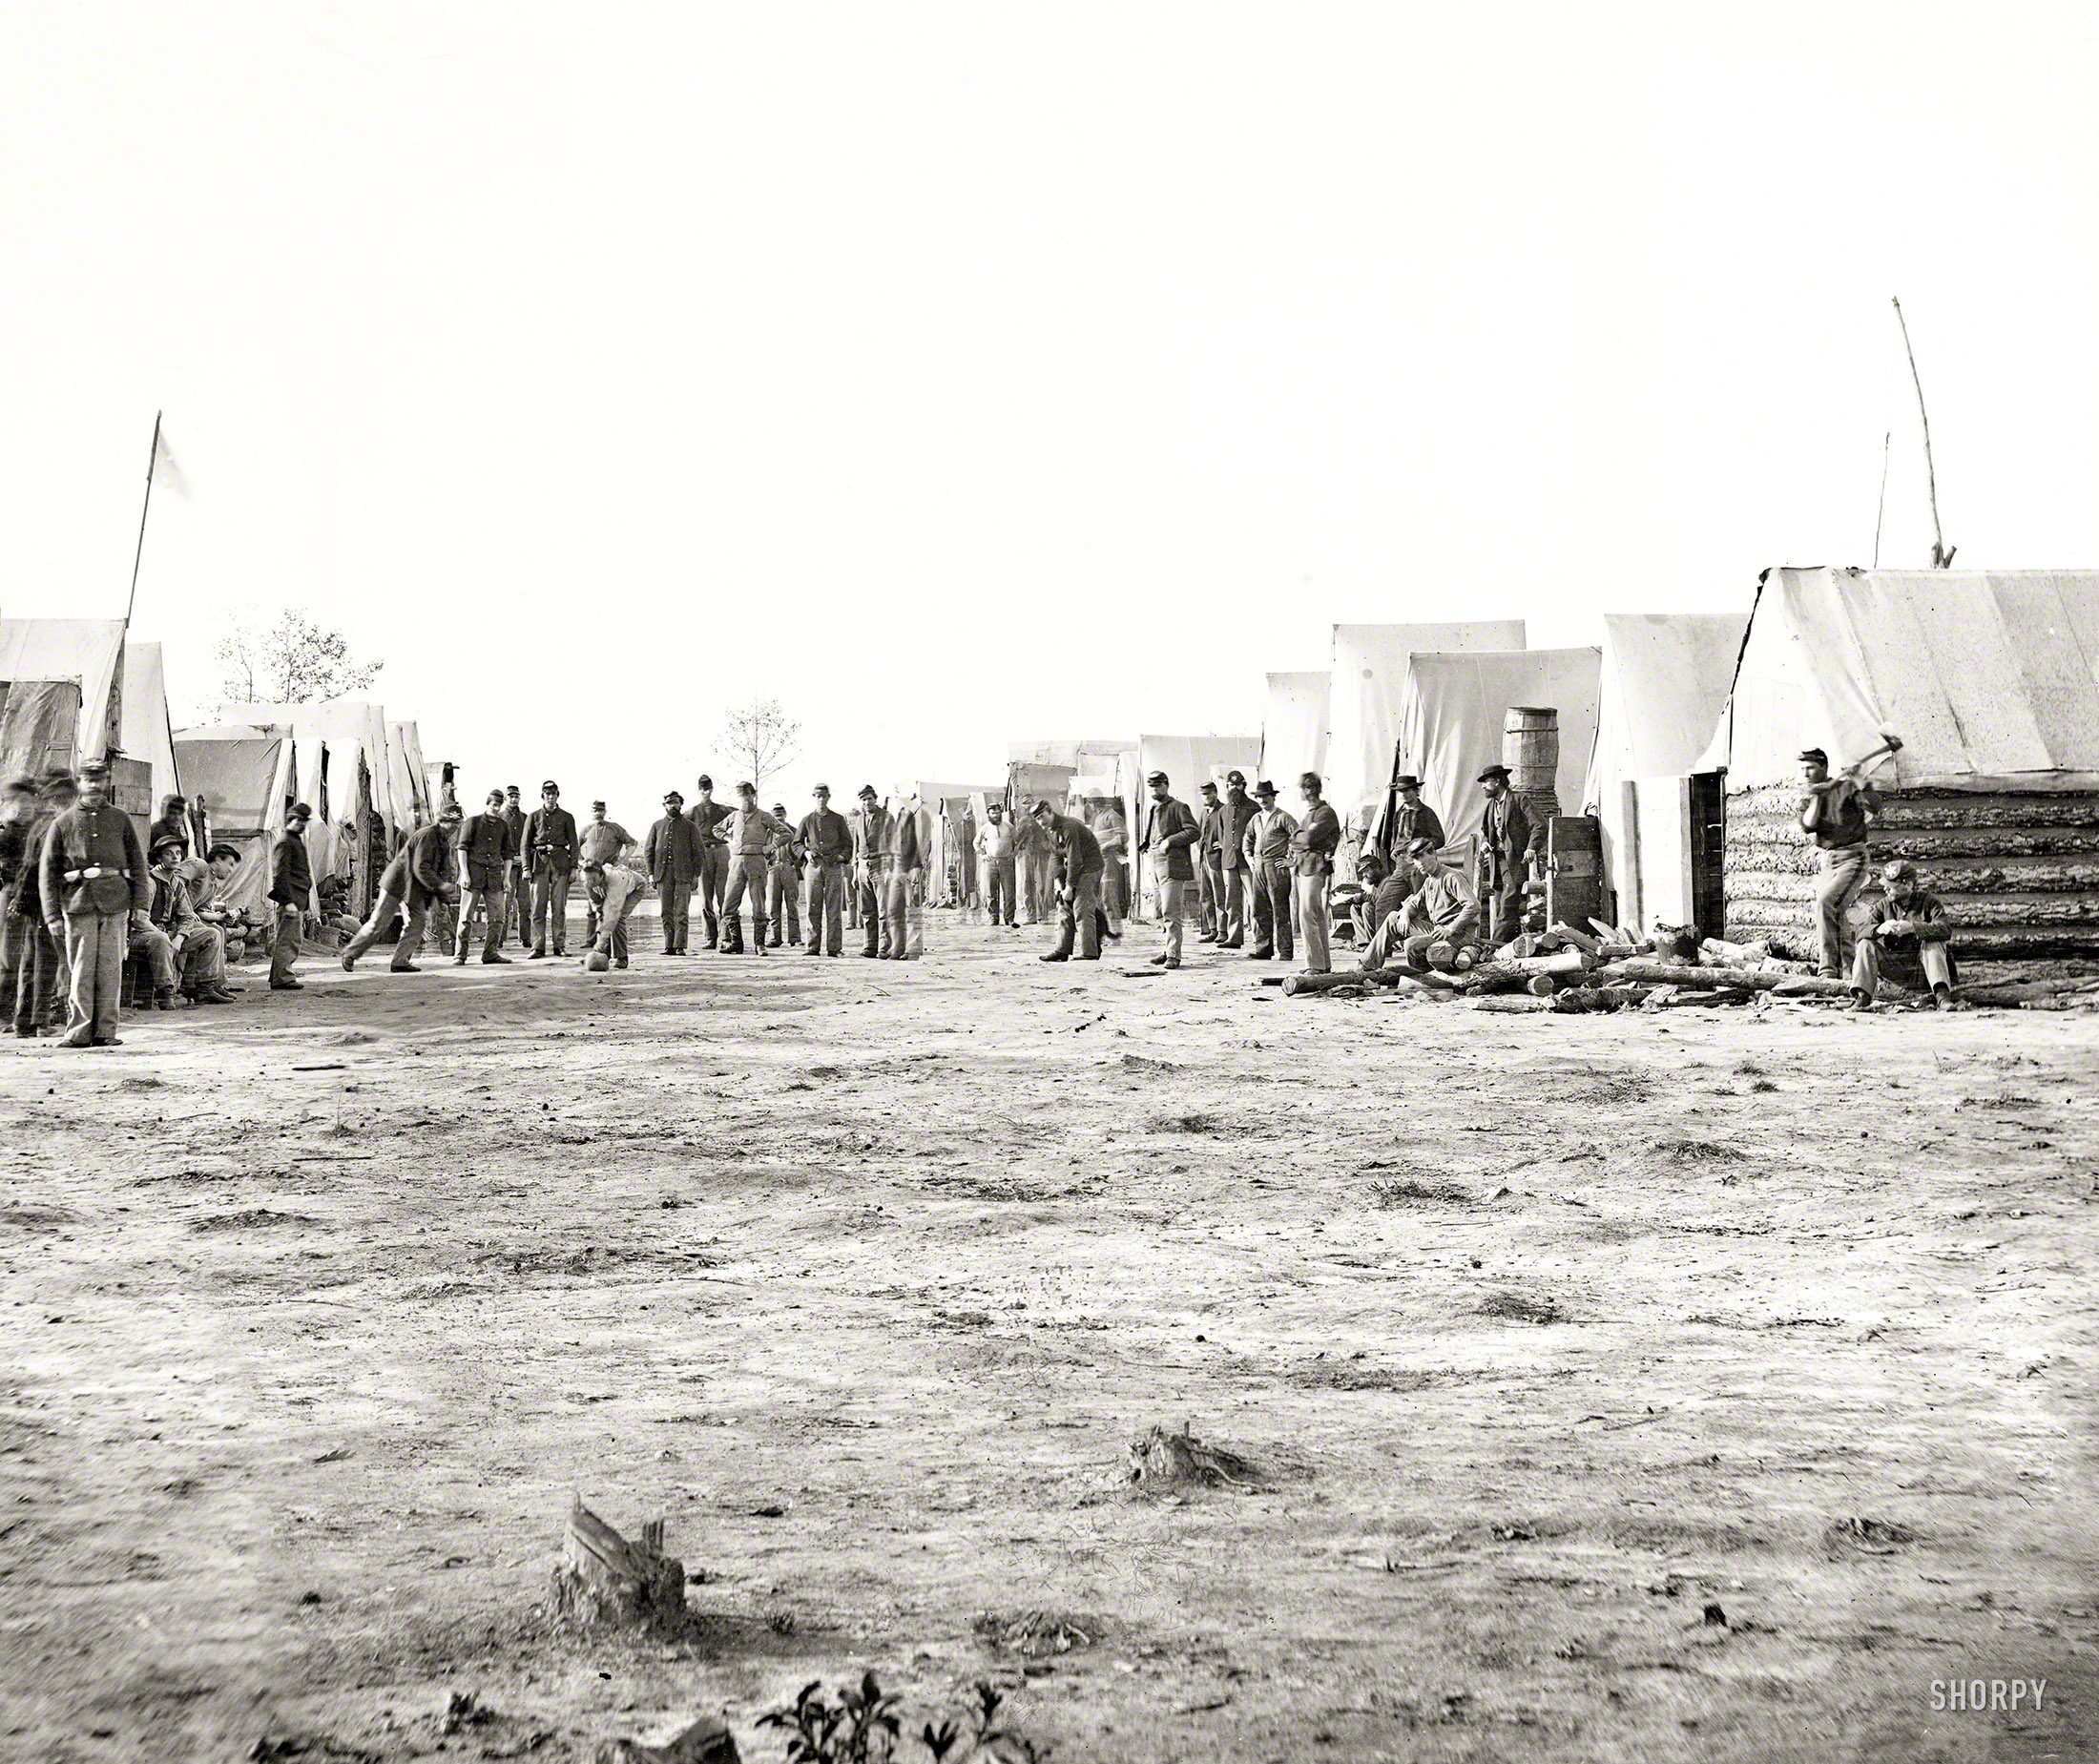 Petersburg, Va., 1864-65. "Camp sports. 13th New York Heavy Artillery playing ball." Civil War Glass Negative Collection, Library of Congress. View full size.